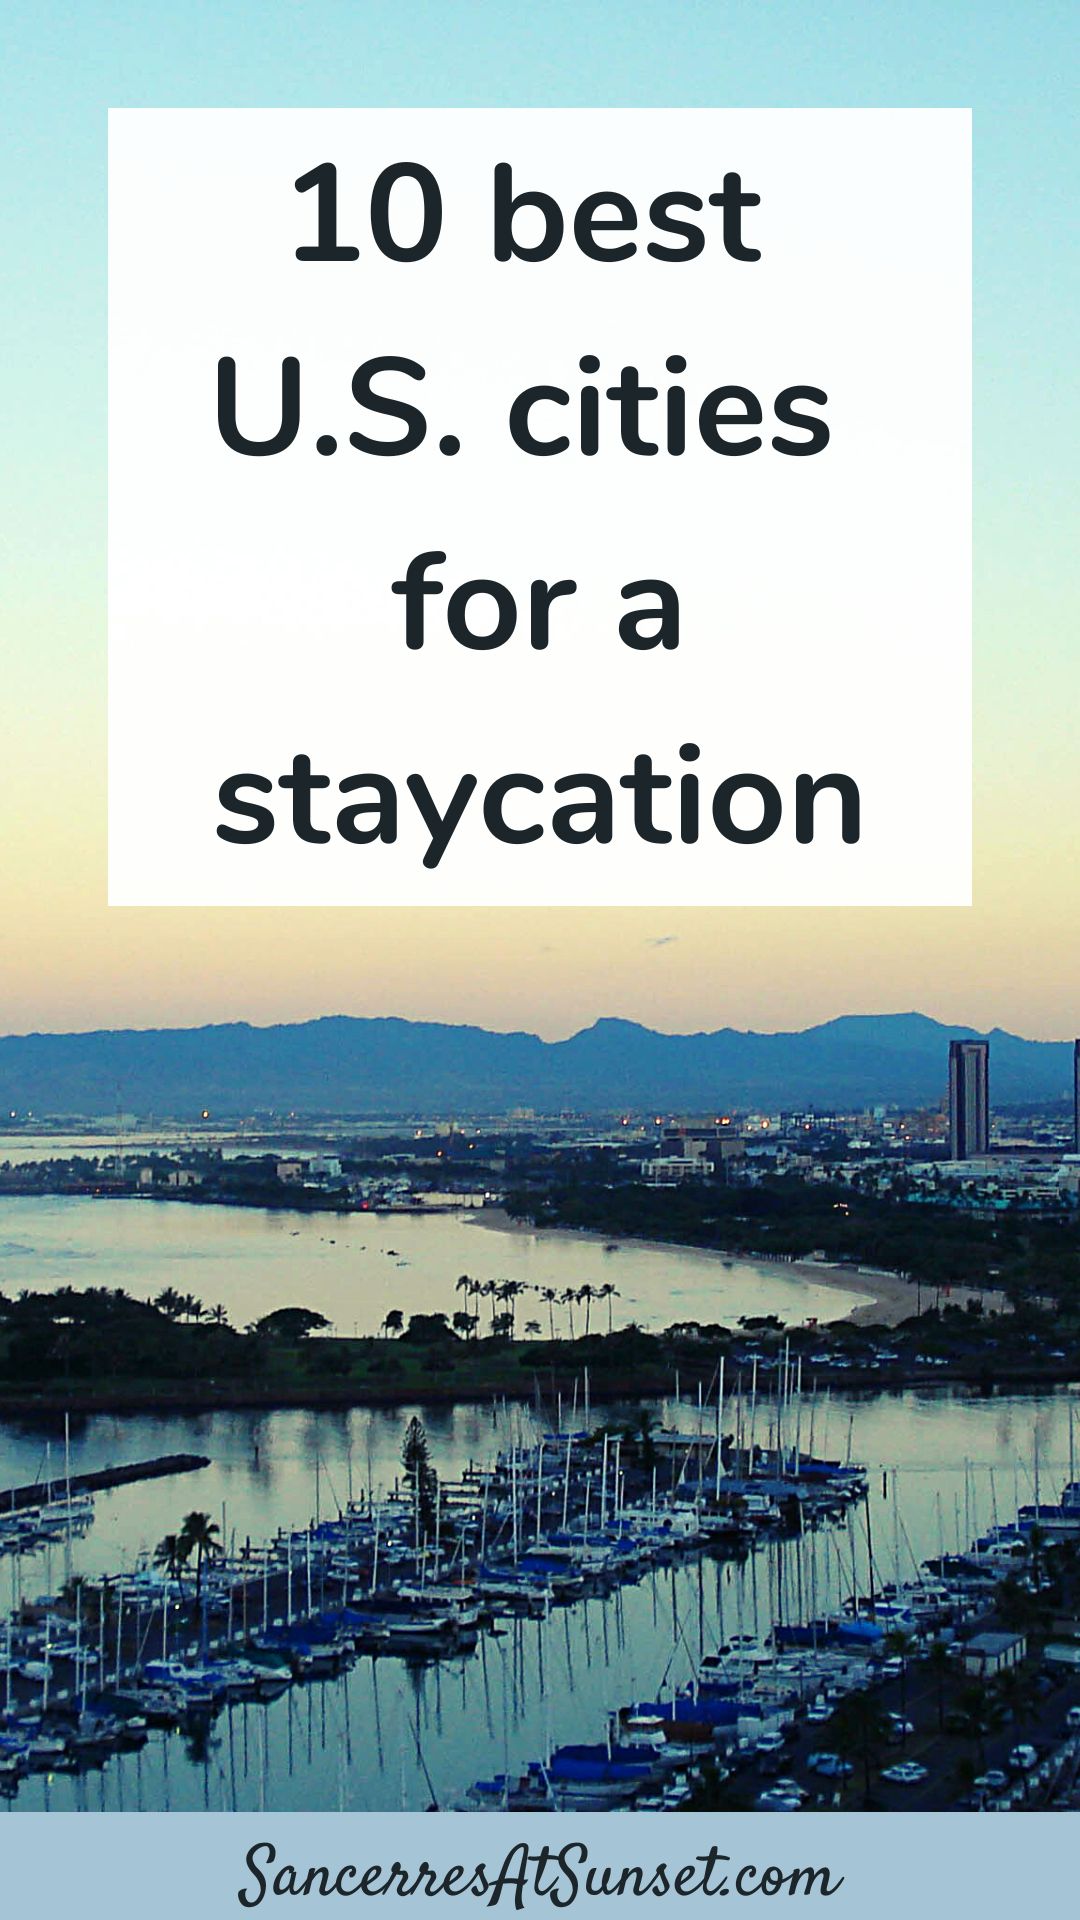 10 Best U.S. Cities for a Staycation